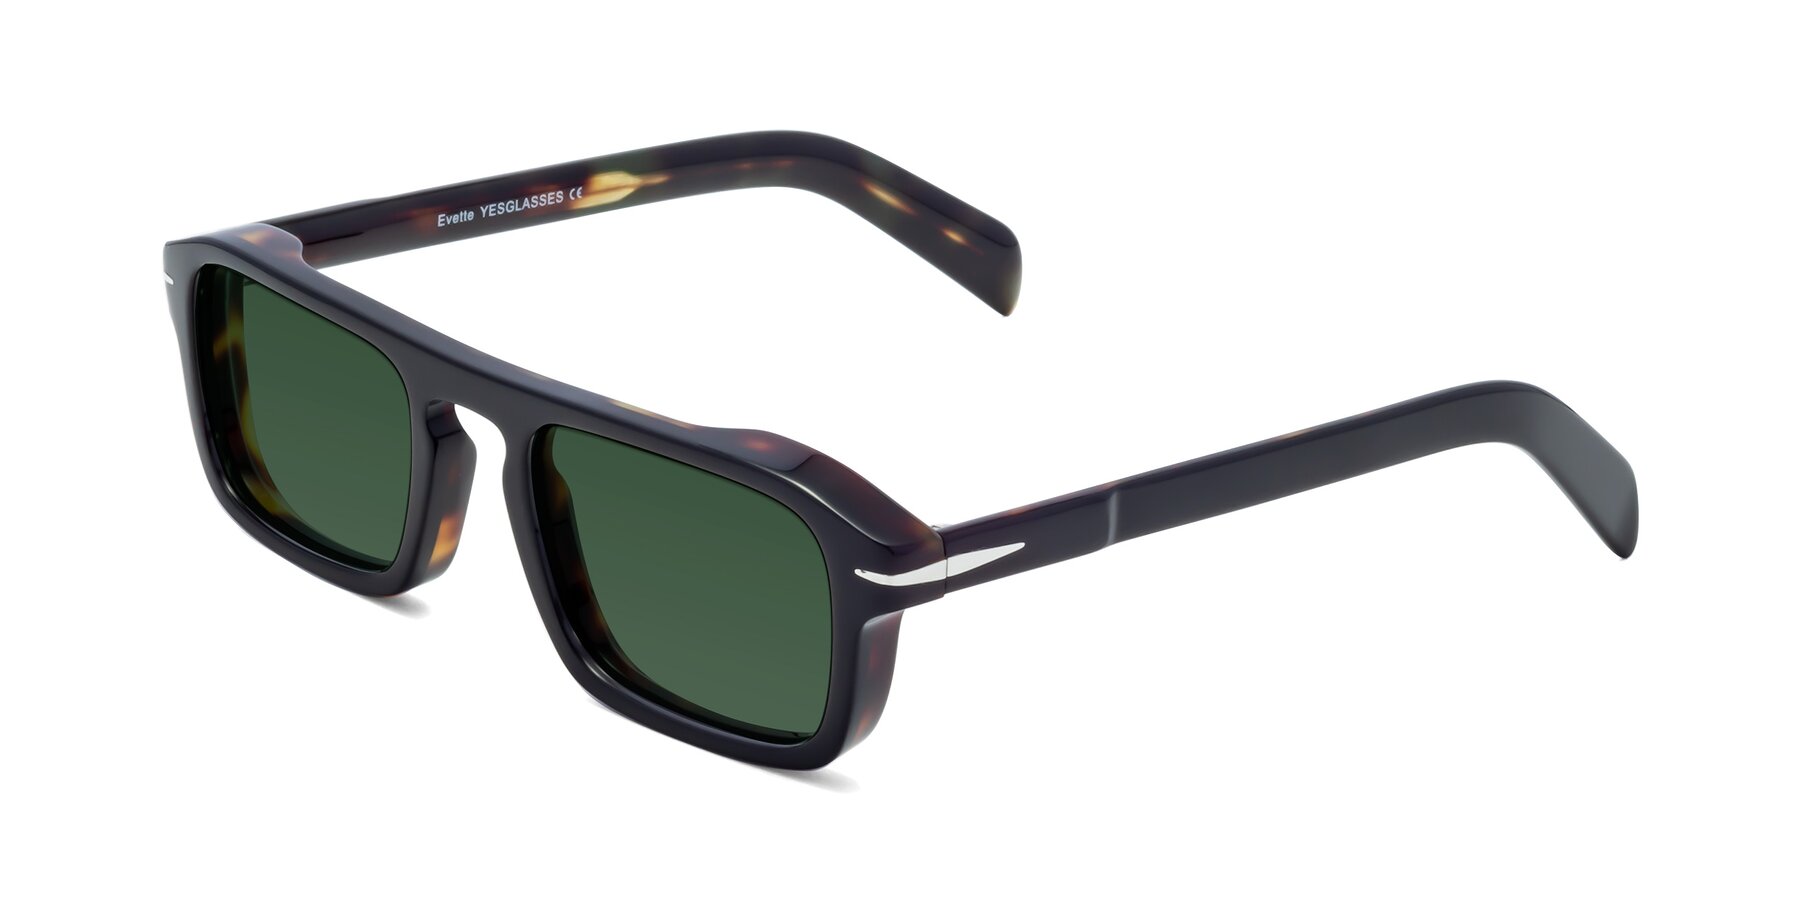 Angle of Evette in Black-Tortoise with Green Tinted Lenses